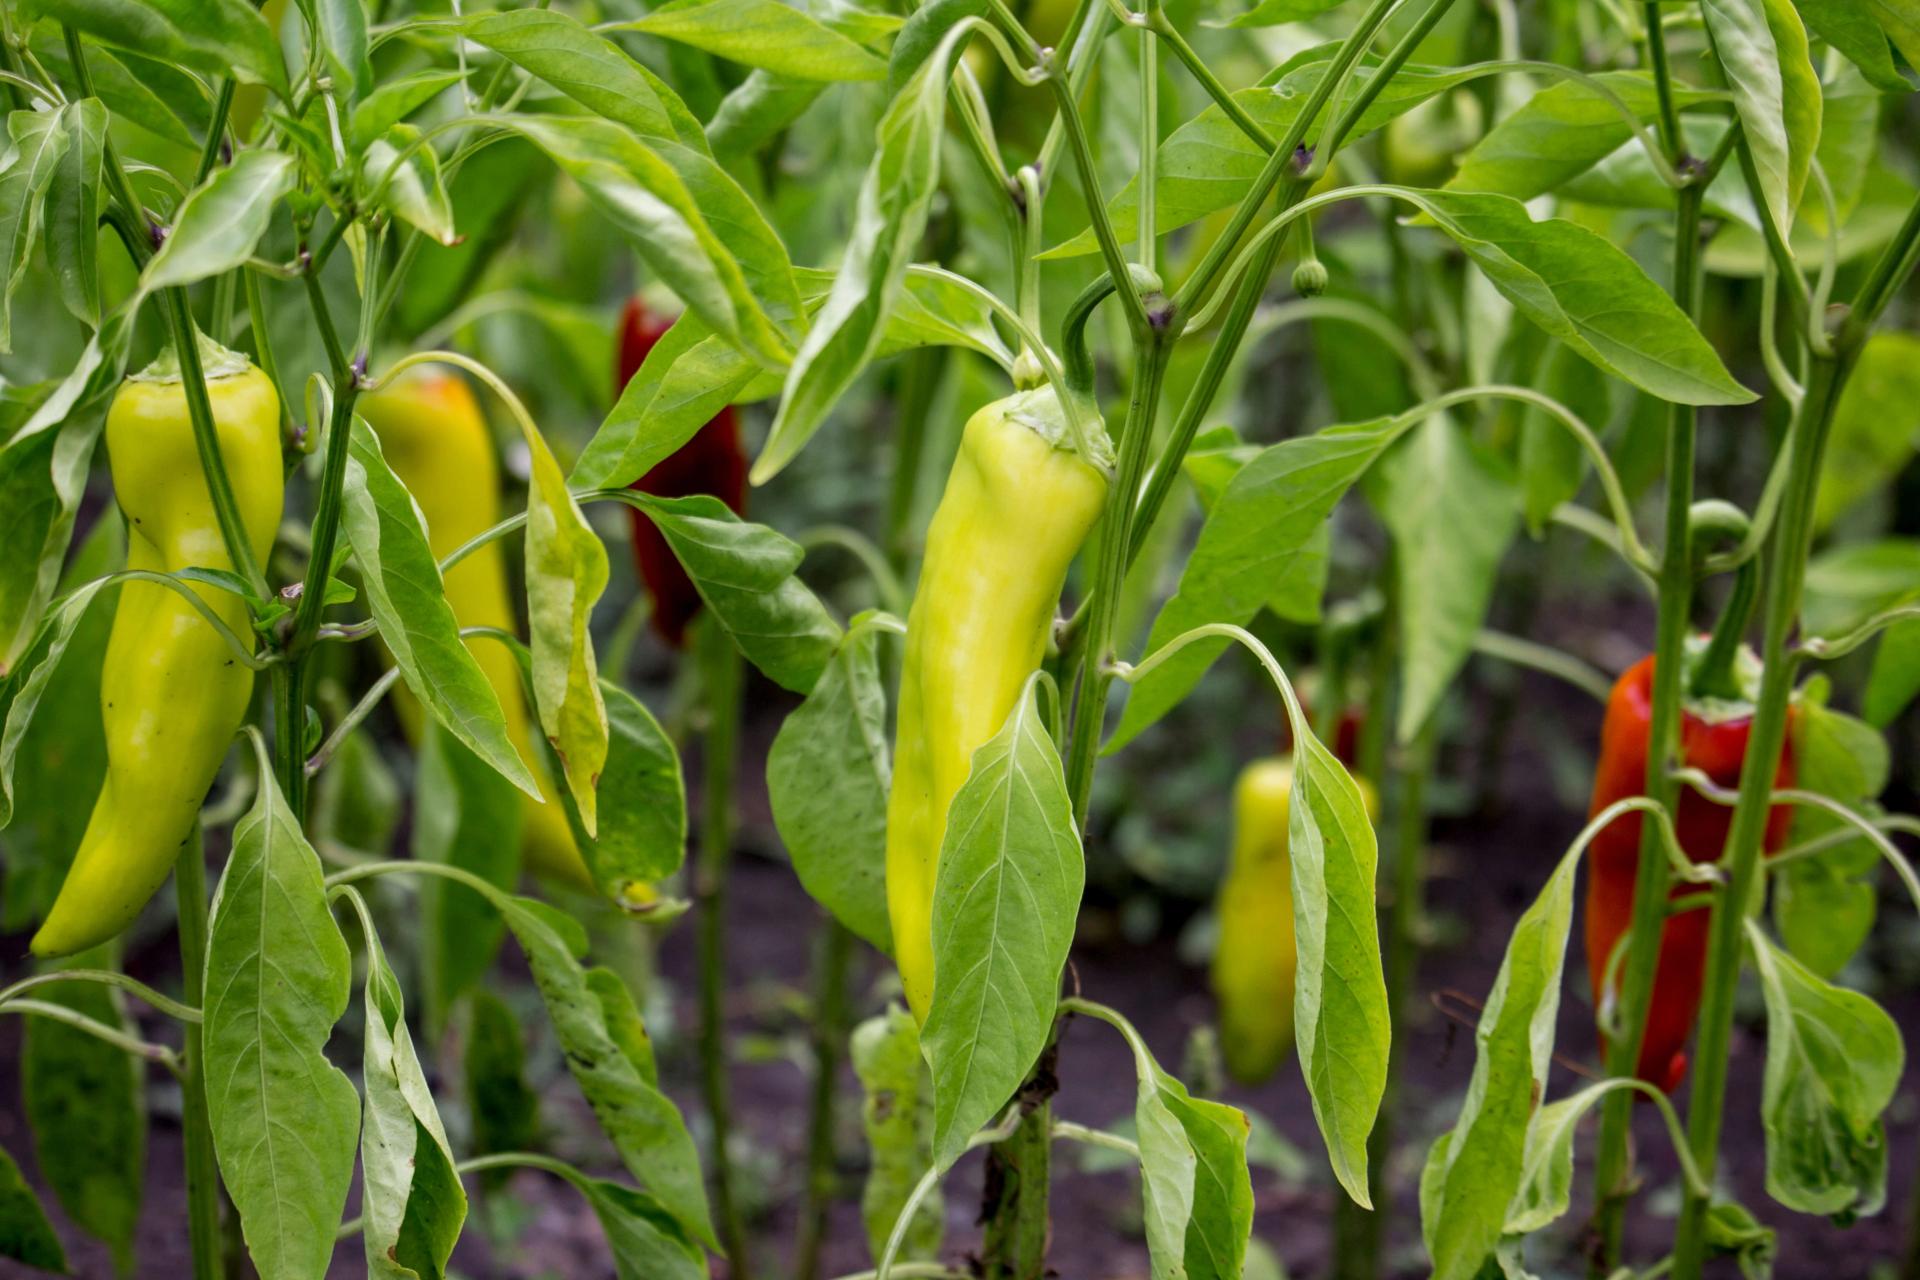 Growing peppers